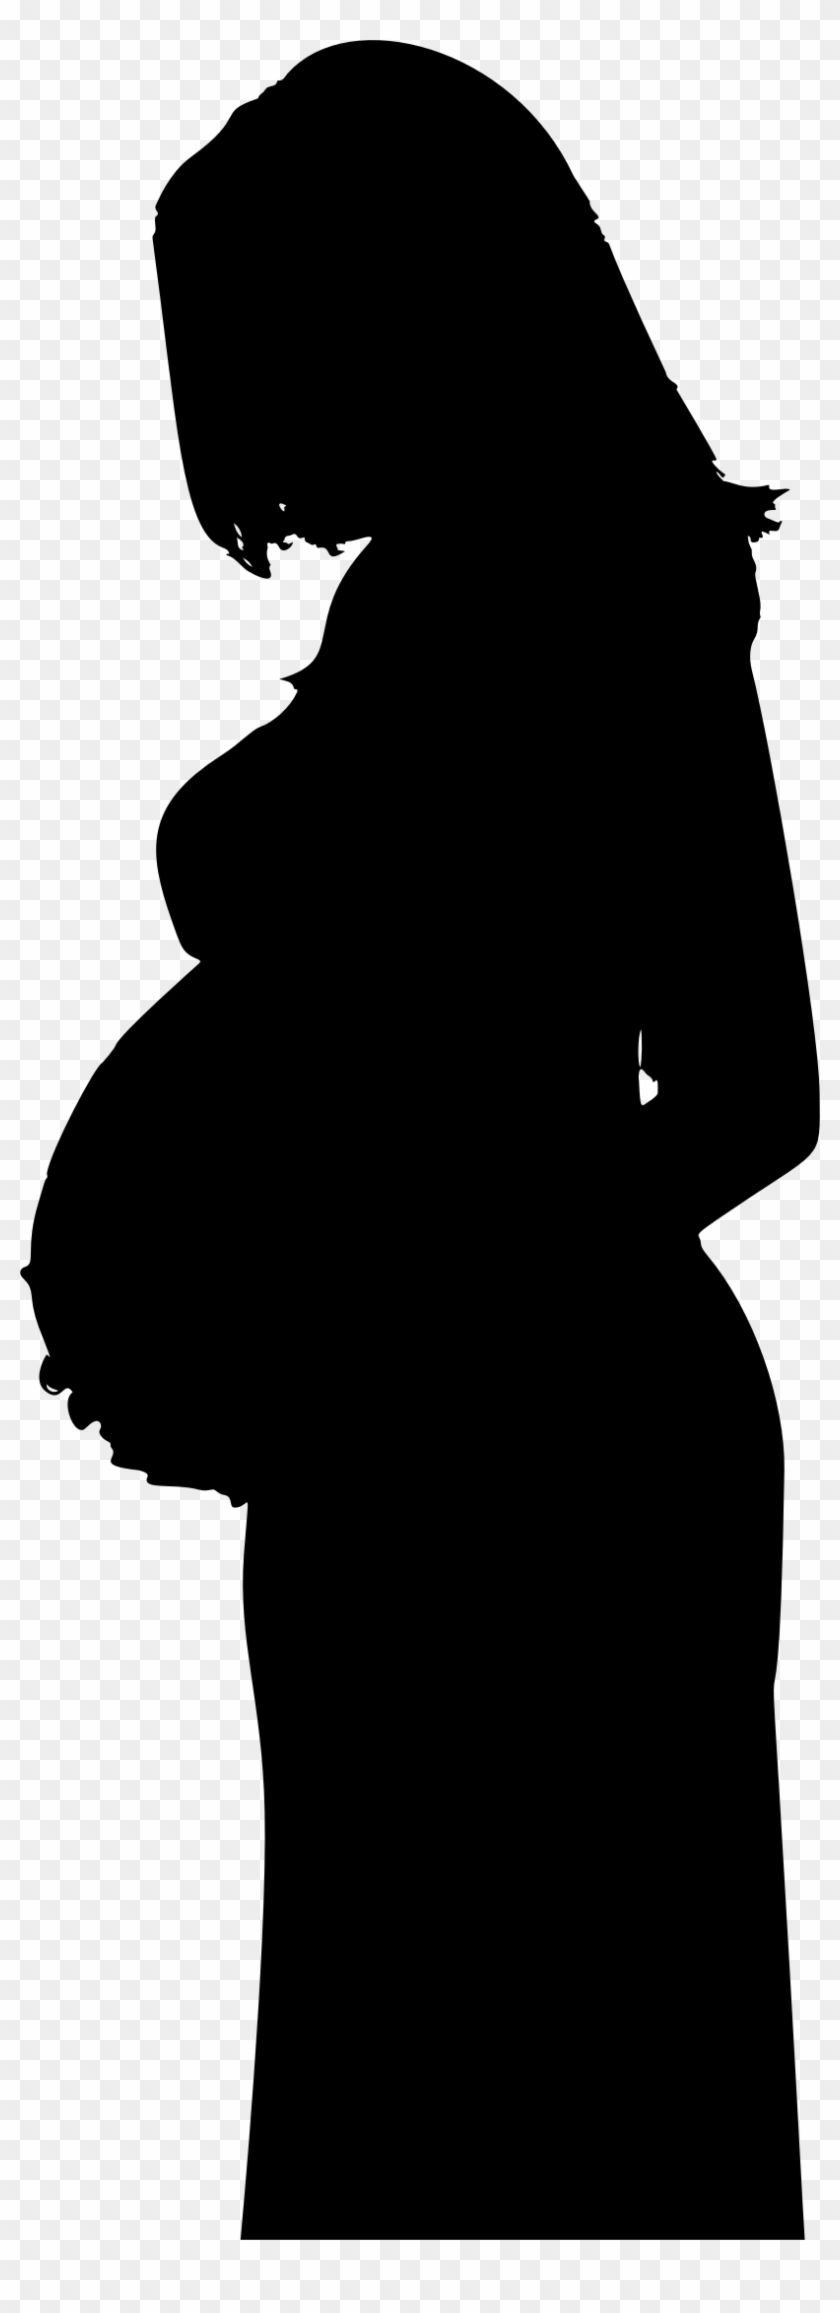 Big Image - Mom To Be Silhouette #438077